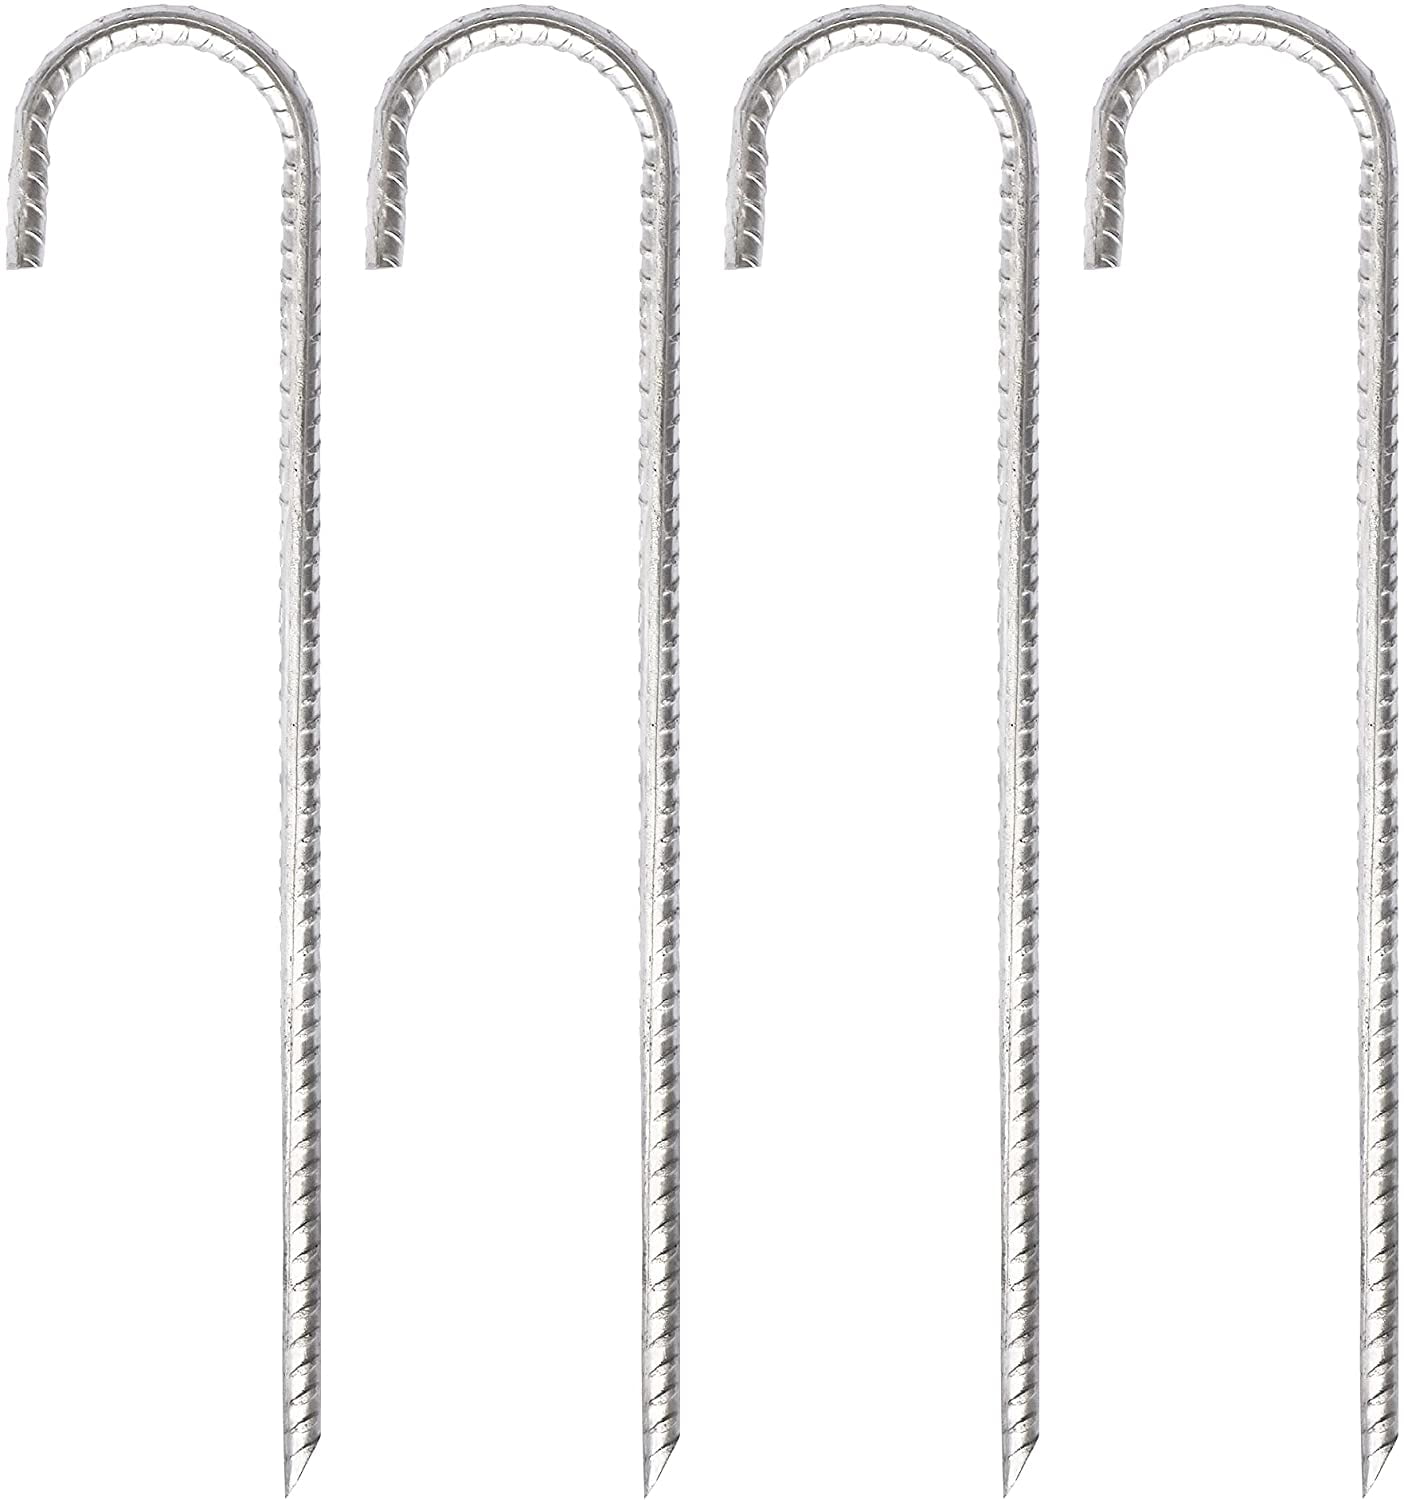 Canopy Black Fence Pack of 4 Eurmax USA 12 inch Galvanized Rebar Stakes Heavy Duty J Hook Tent Stakes Ground Anchors for Trampoline 